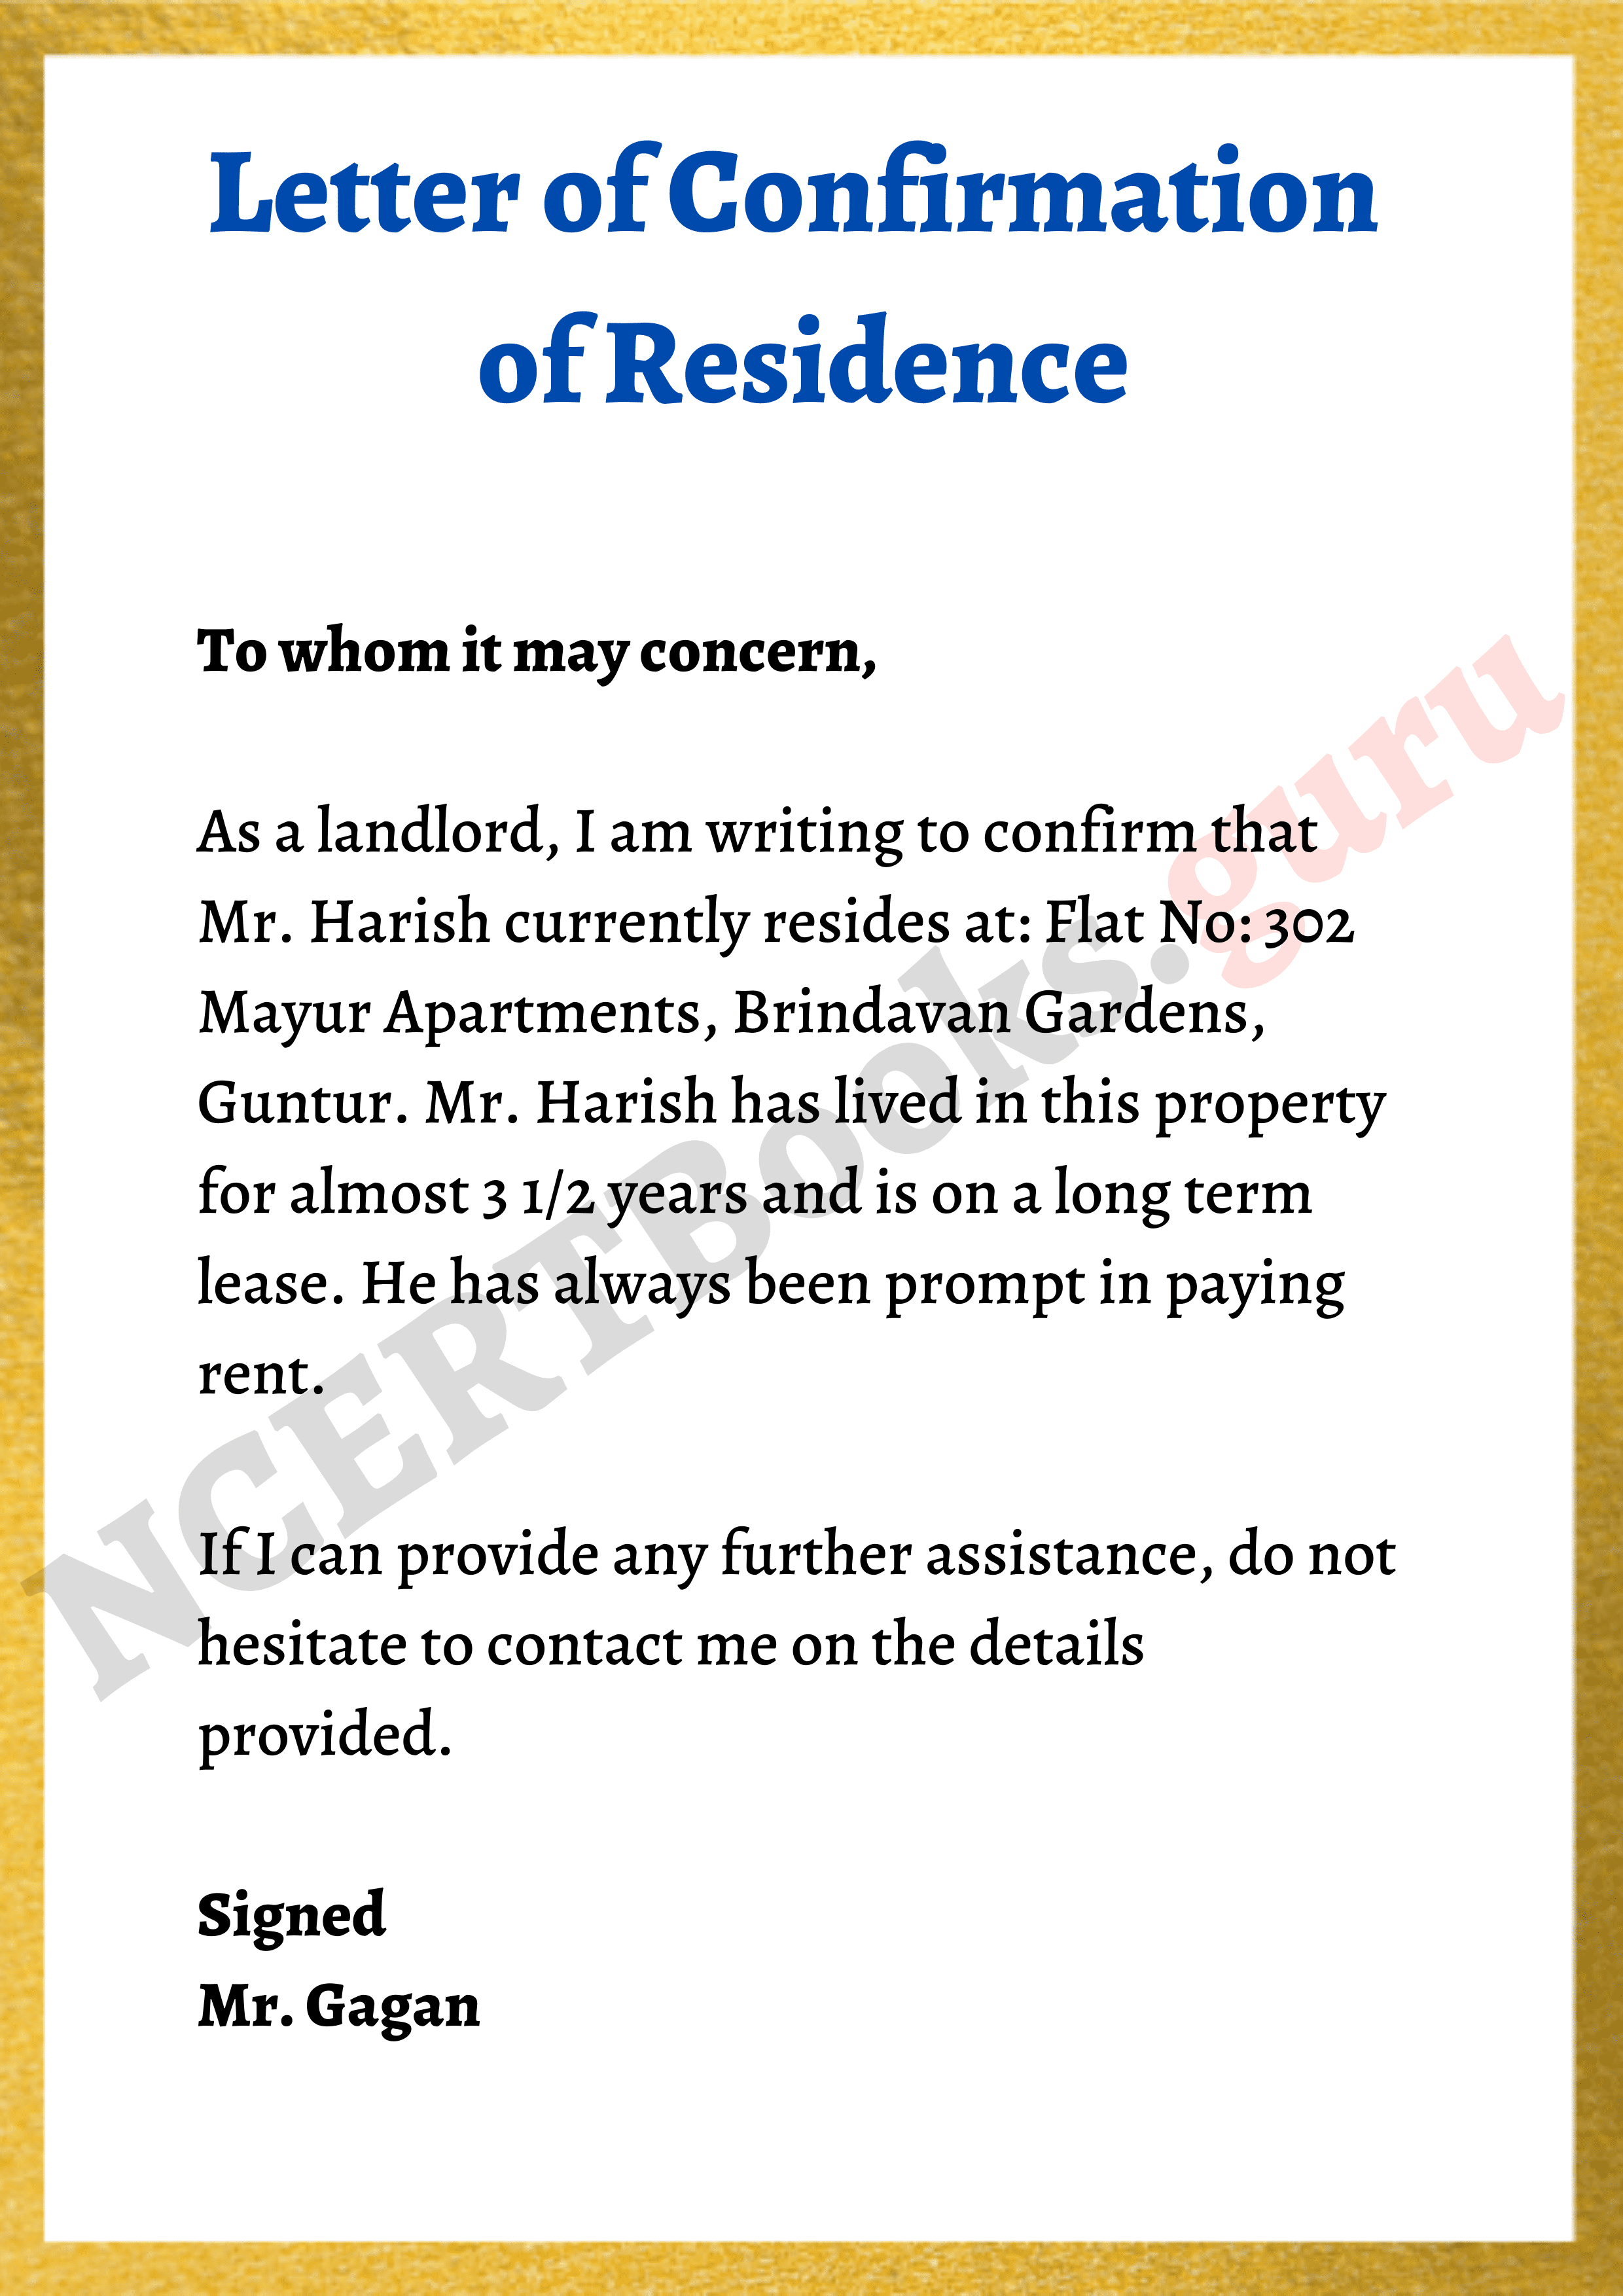 Letter of Confirmation for Residence